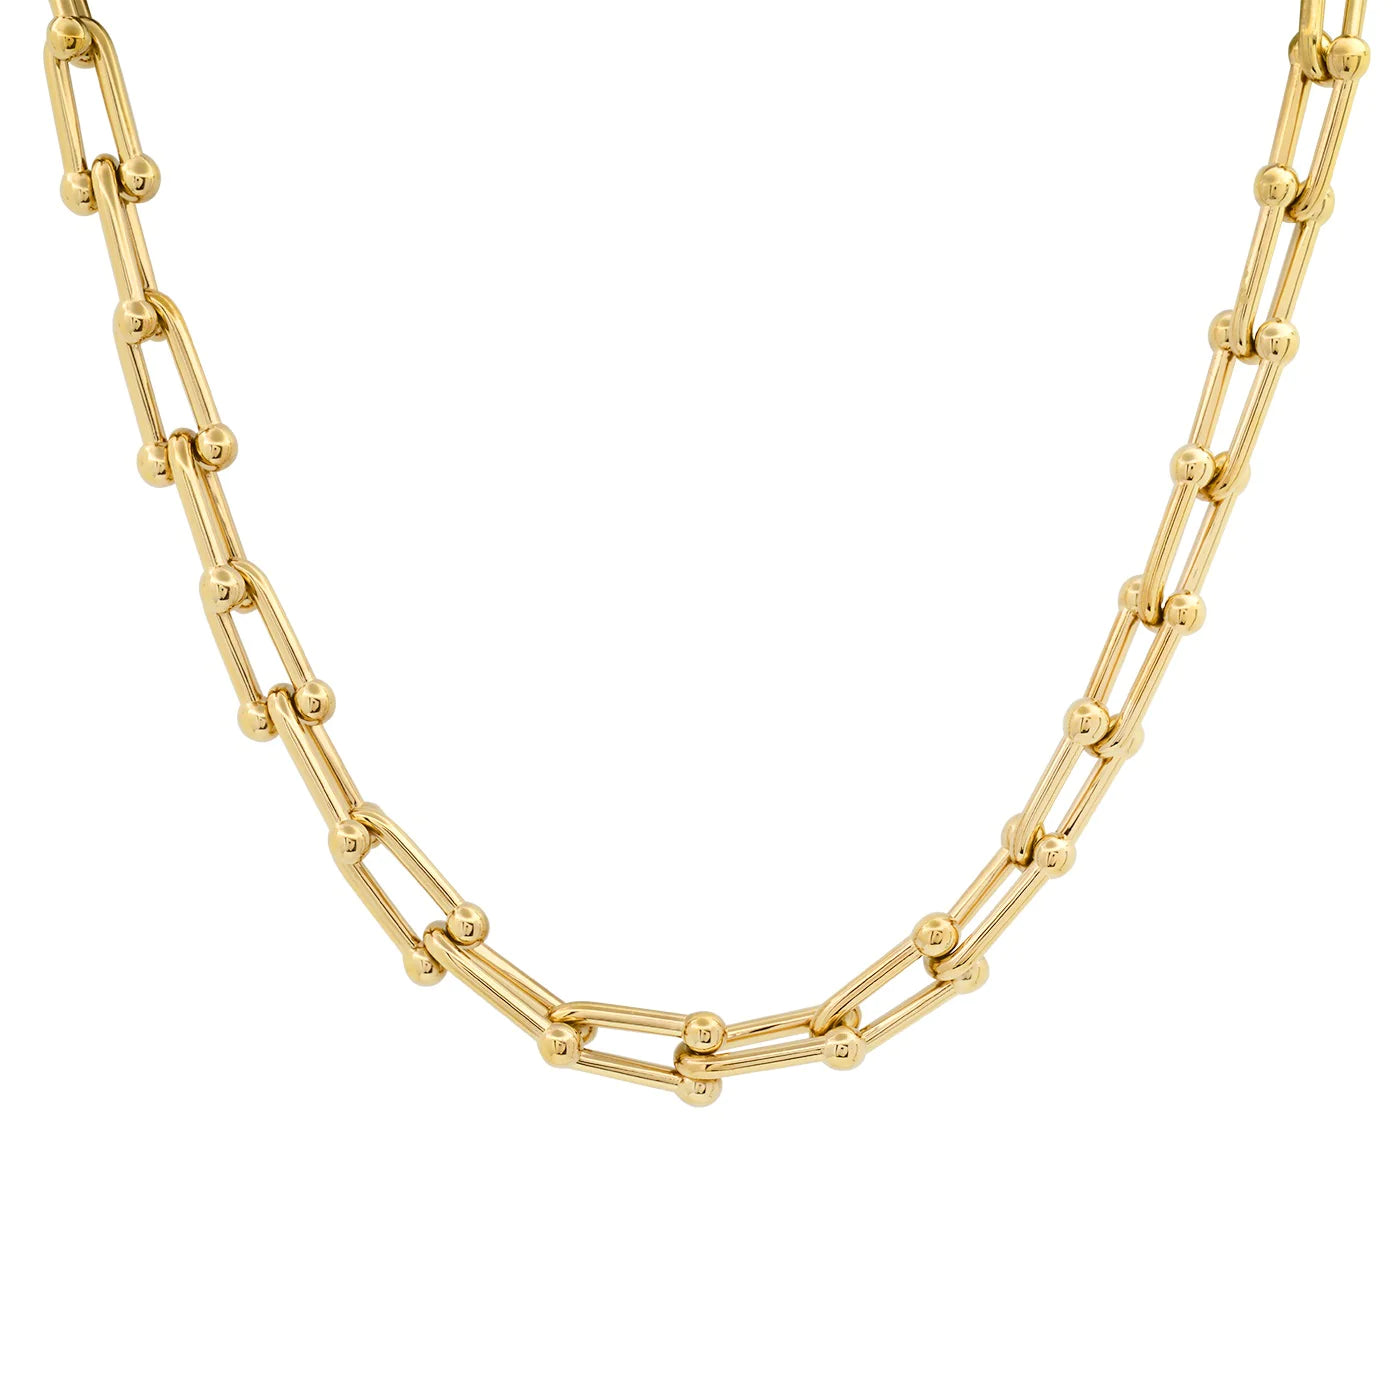 18K GOLD FILLED 8MM BEAD HORSESHOE LINK CHAIN